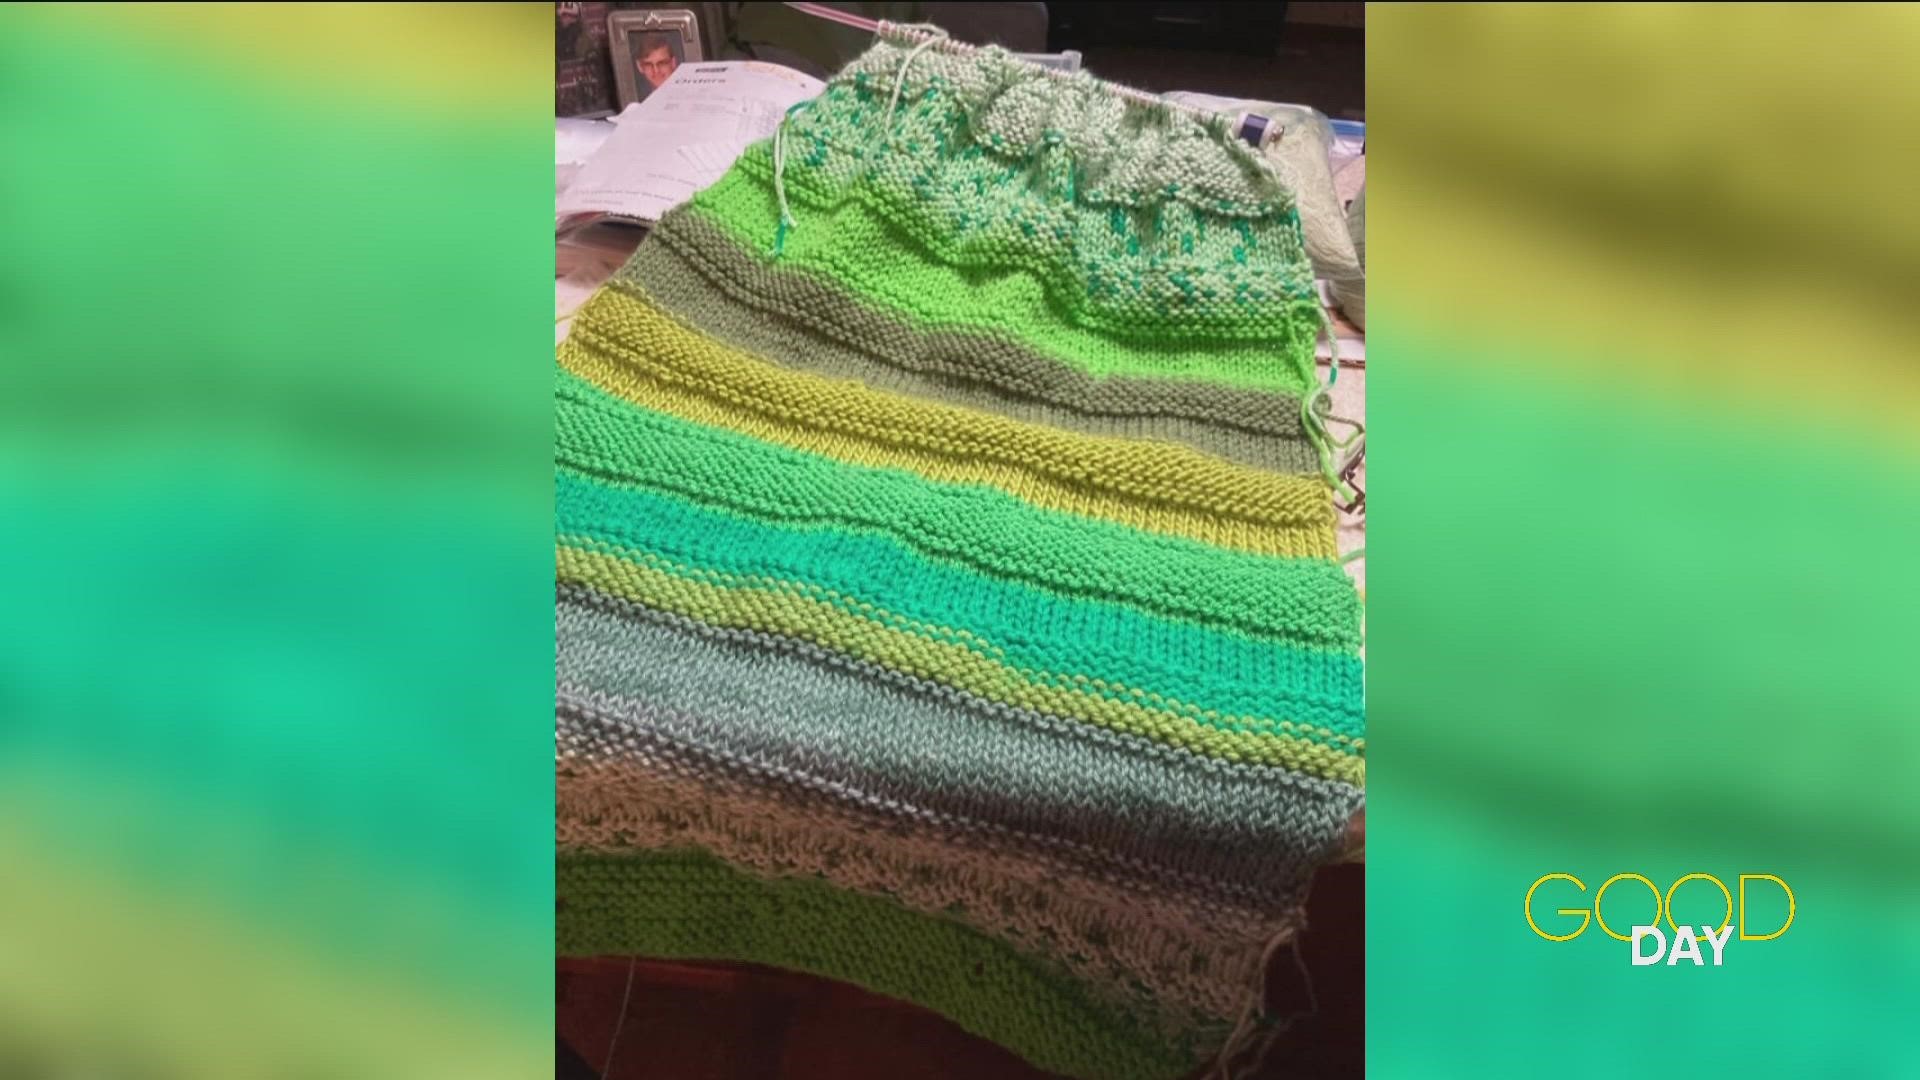 Amanda shares the progress on her scarf, and Steven critiques. Plus, check out what viewers in the area have been knitting.